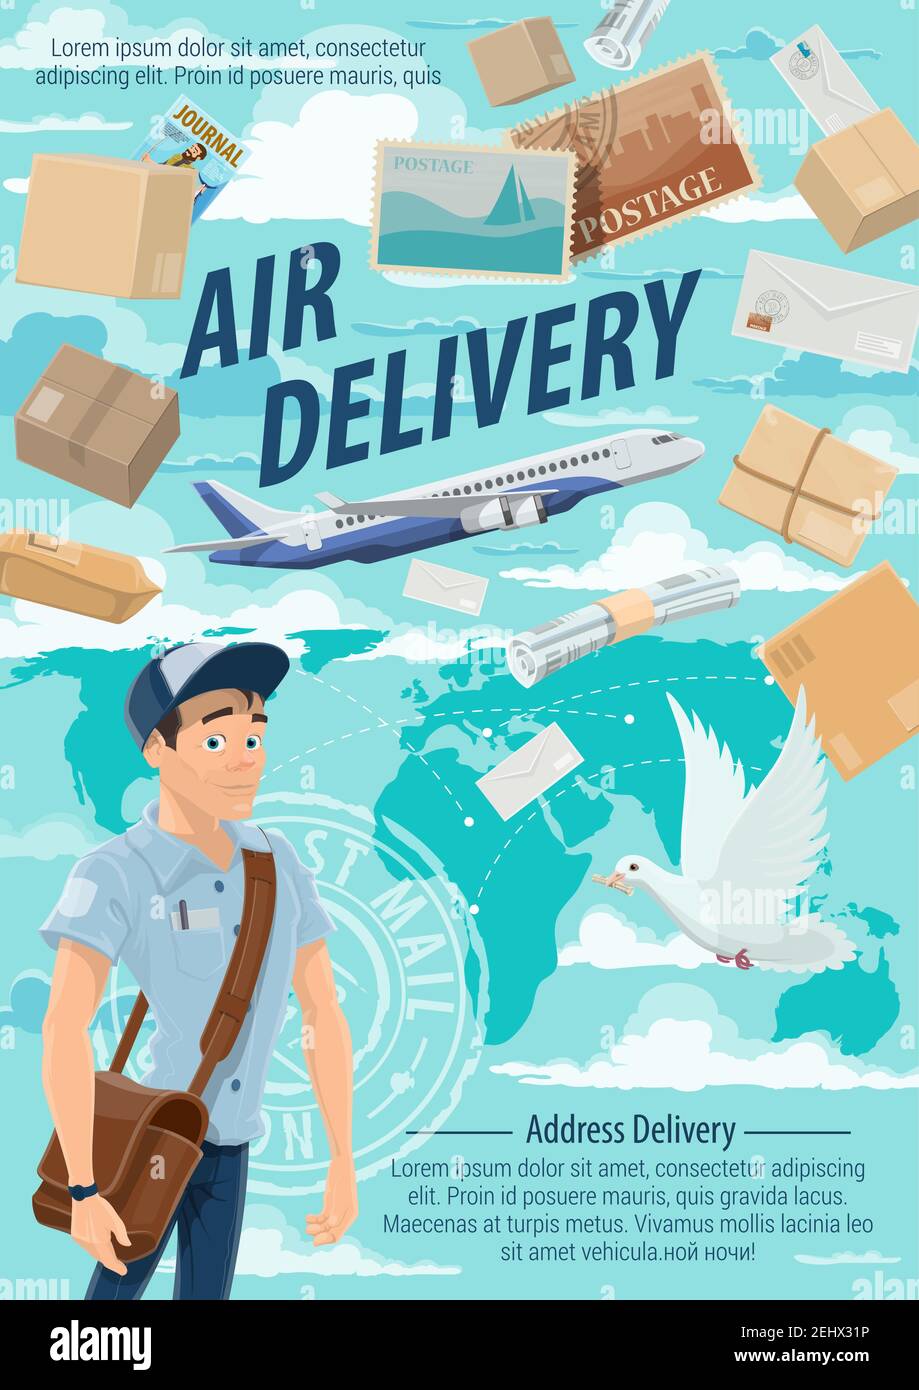 Post mail air delivery, postage logistics. Vector postman or mailman delivering letters, envelopes and parcels. Airplane or liner, postal dove and pos Stock Vector